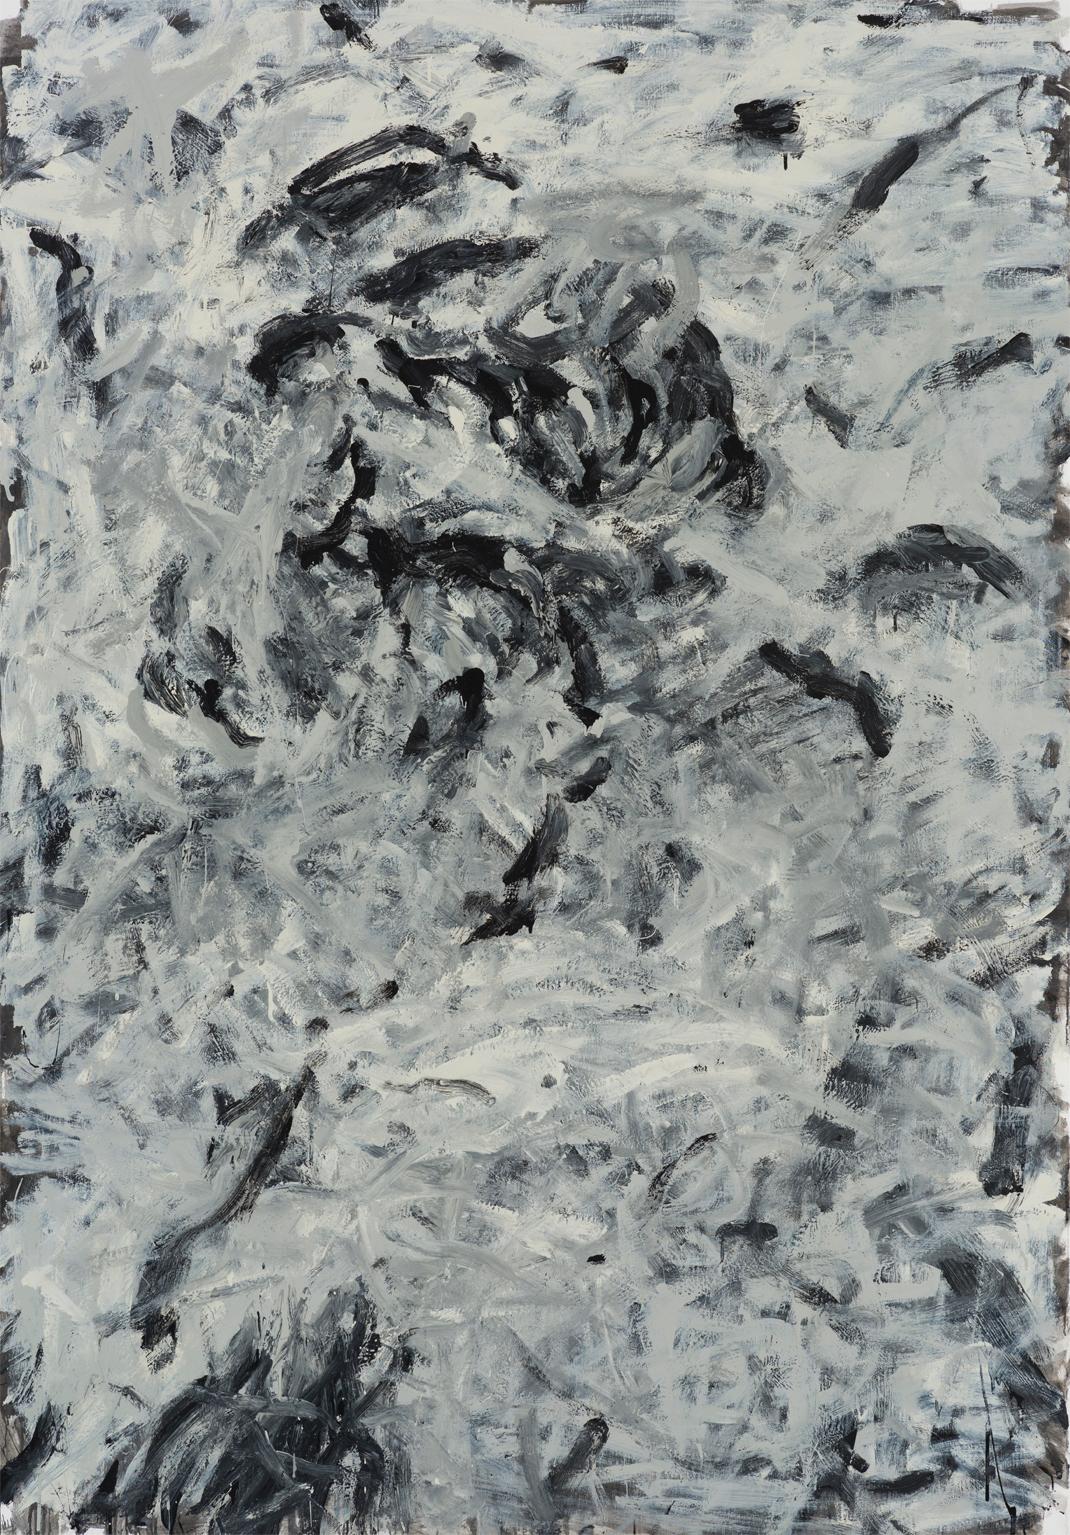 Abstract Painting Zsolt Berszán - Untitled 08 [Remains of the Remains 08] - Peinture abstraite, noir, blanc